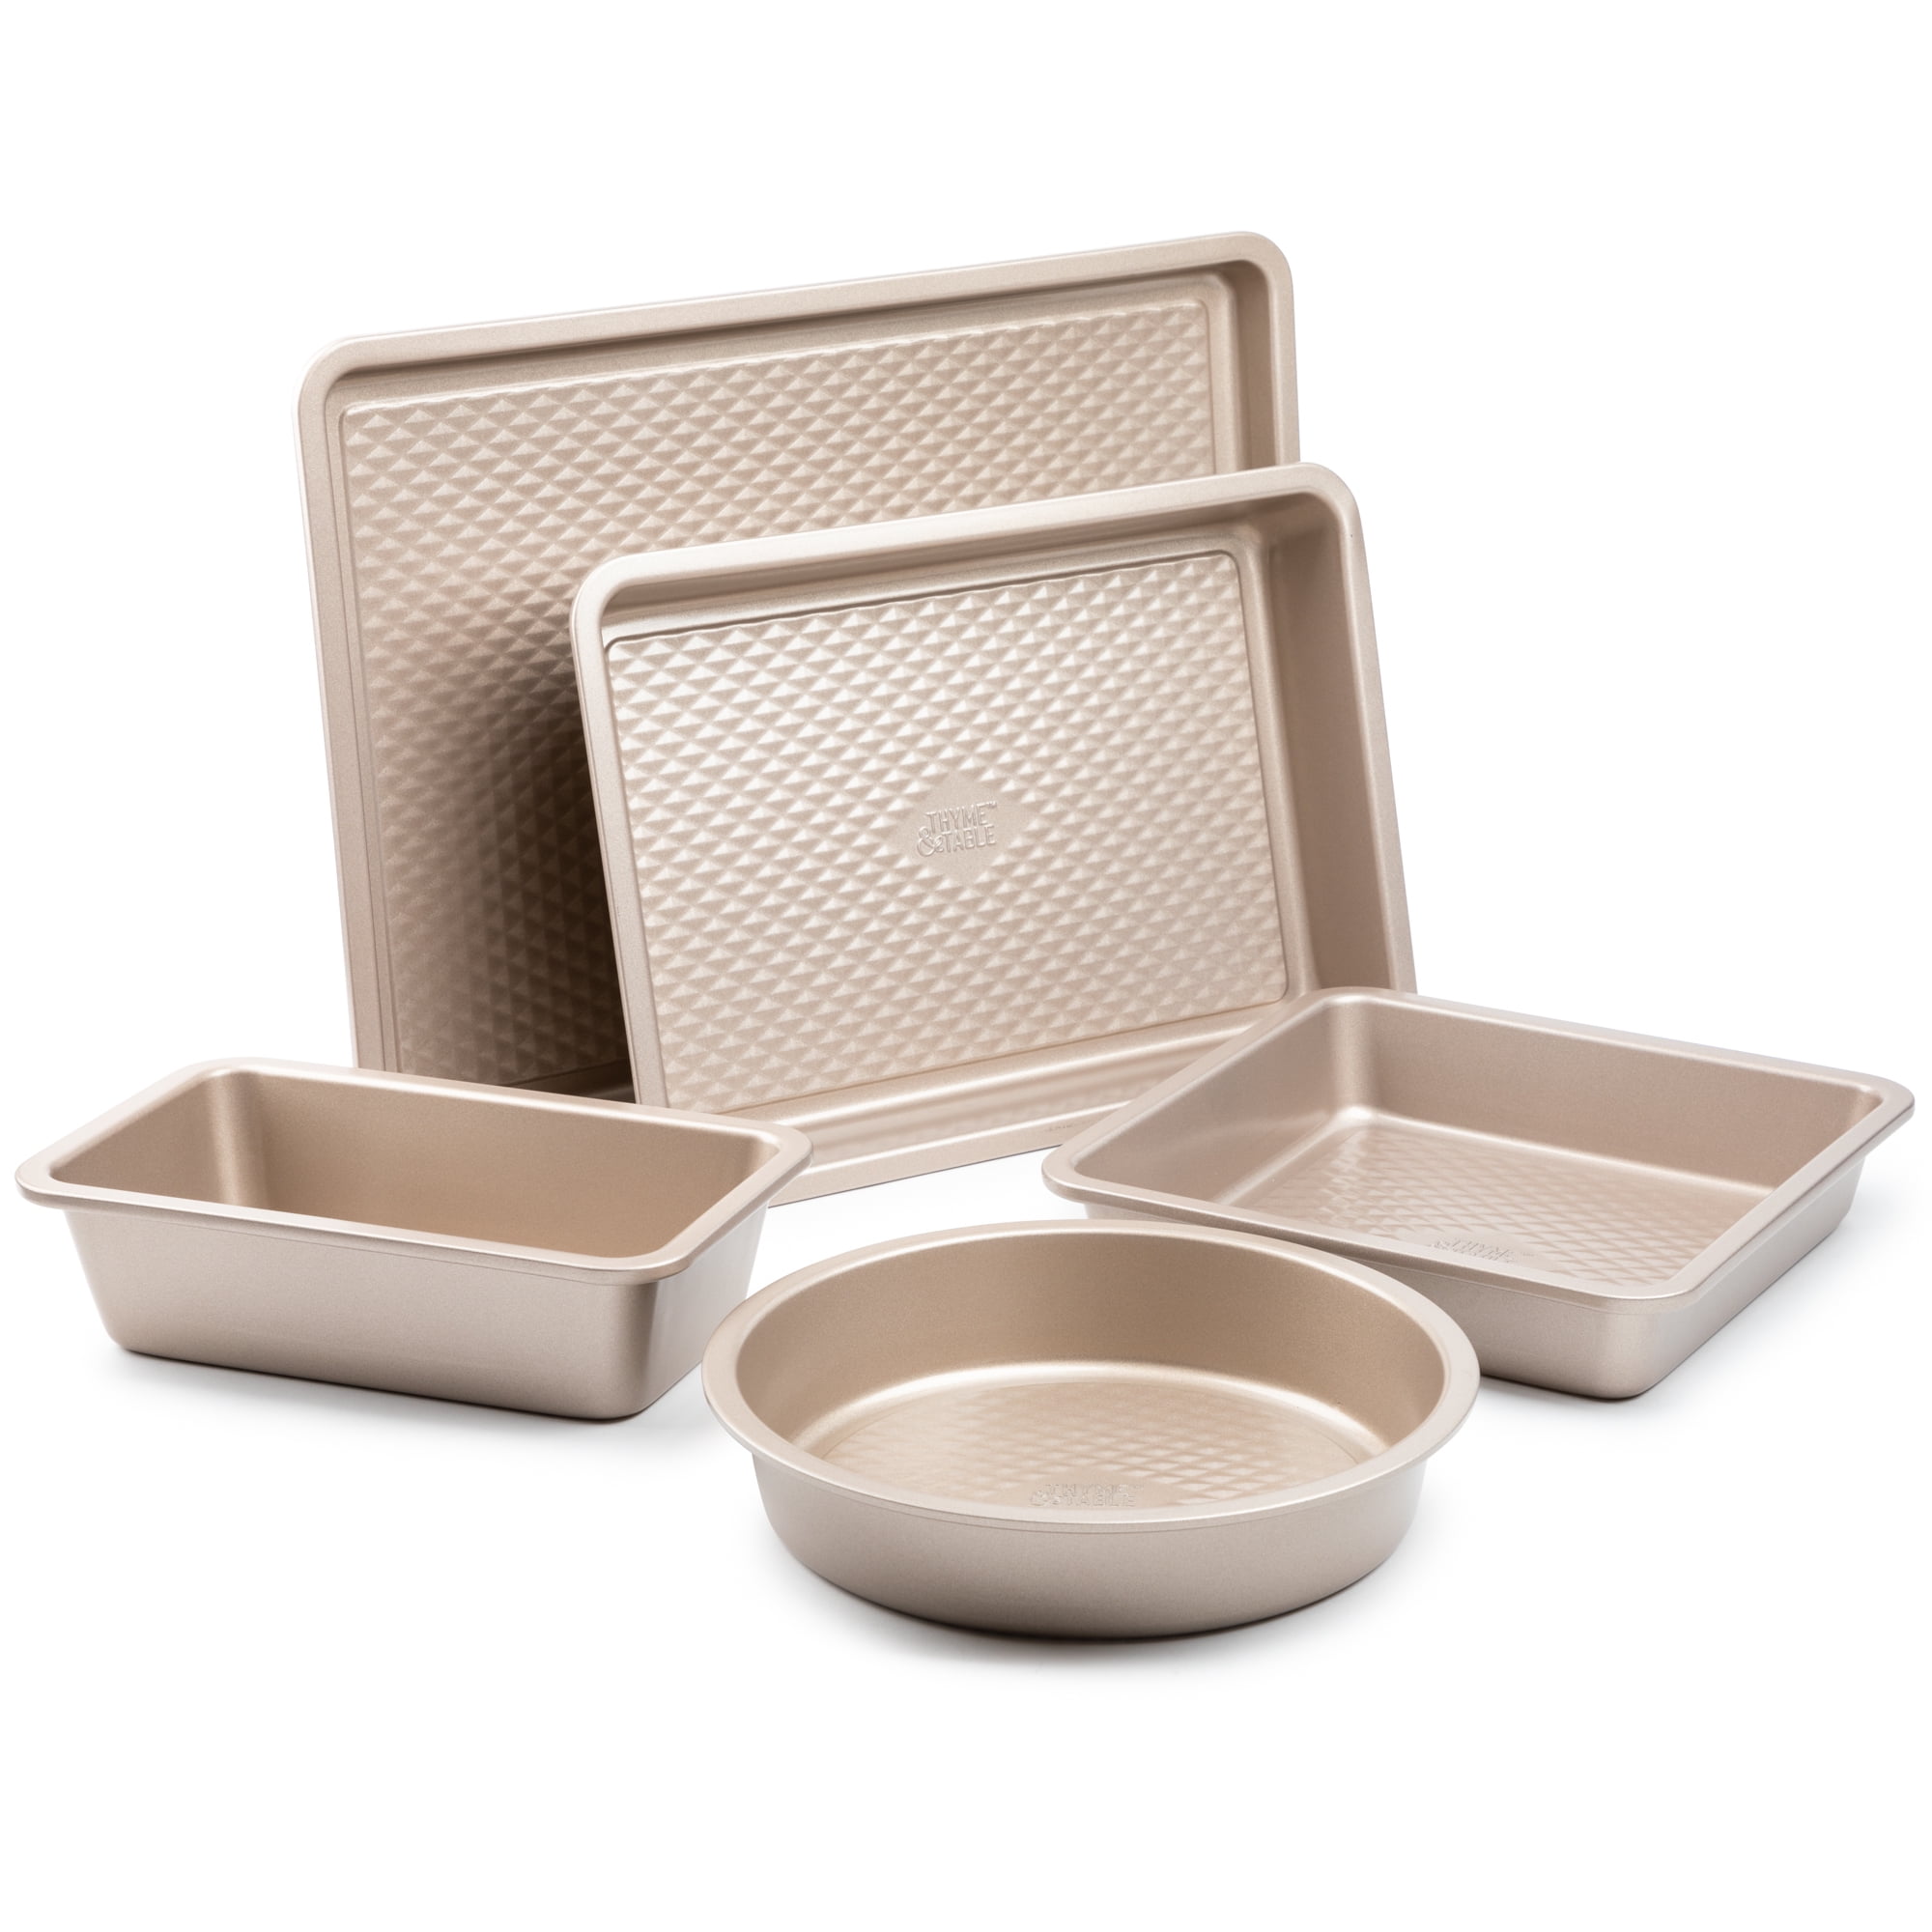 Ayesha Curry 5-Pc. Nonstick Bakeware Set